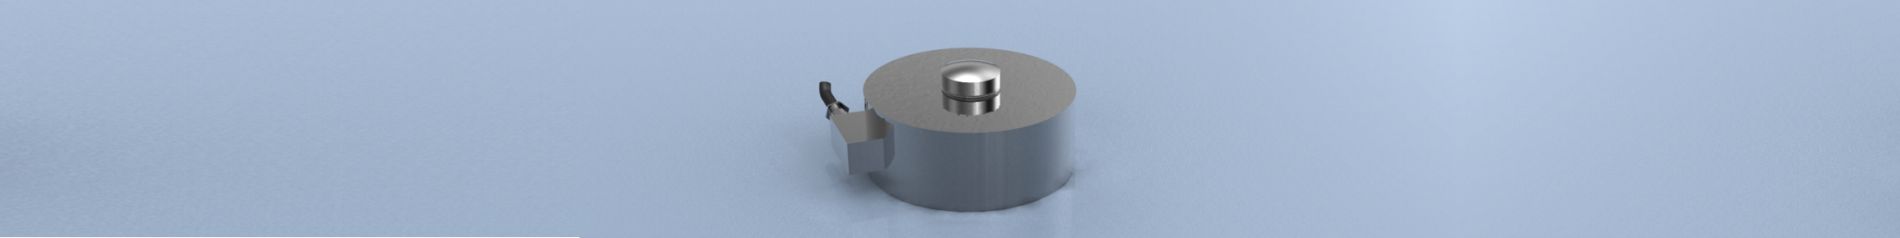 CDIT-3 WMOUNT Weighing Assembly